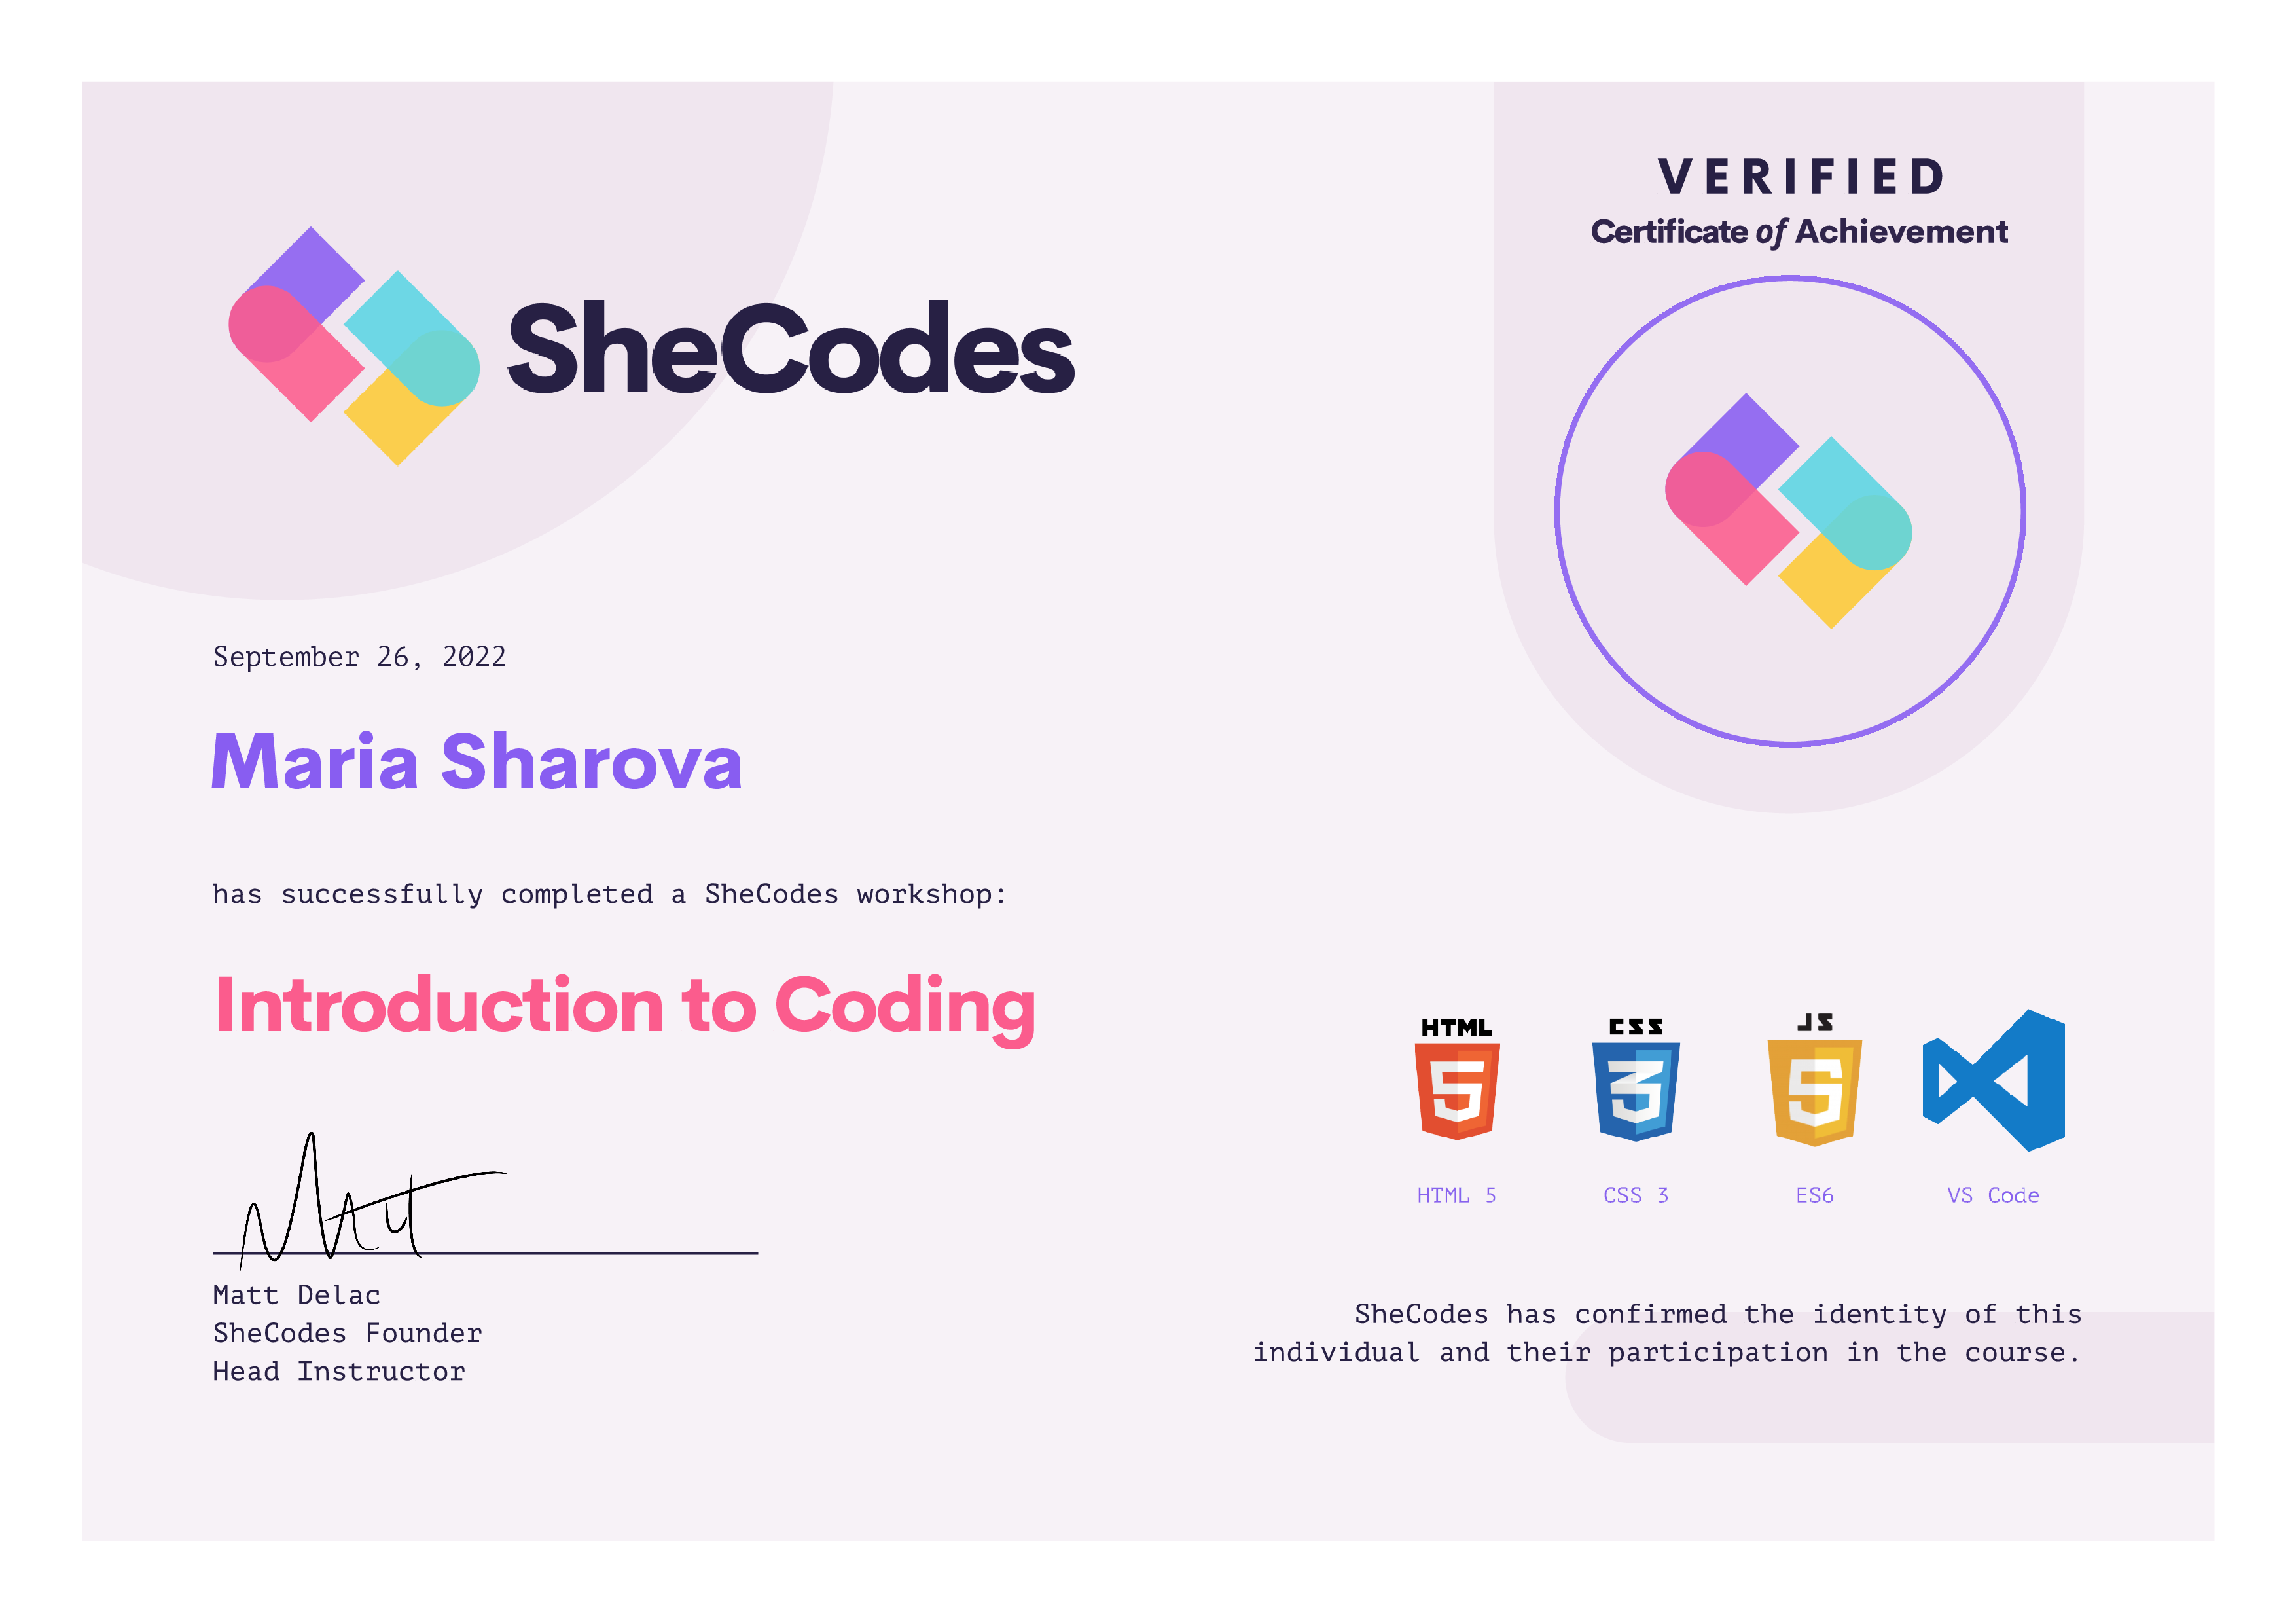 SheCodes Plus certificate